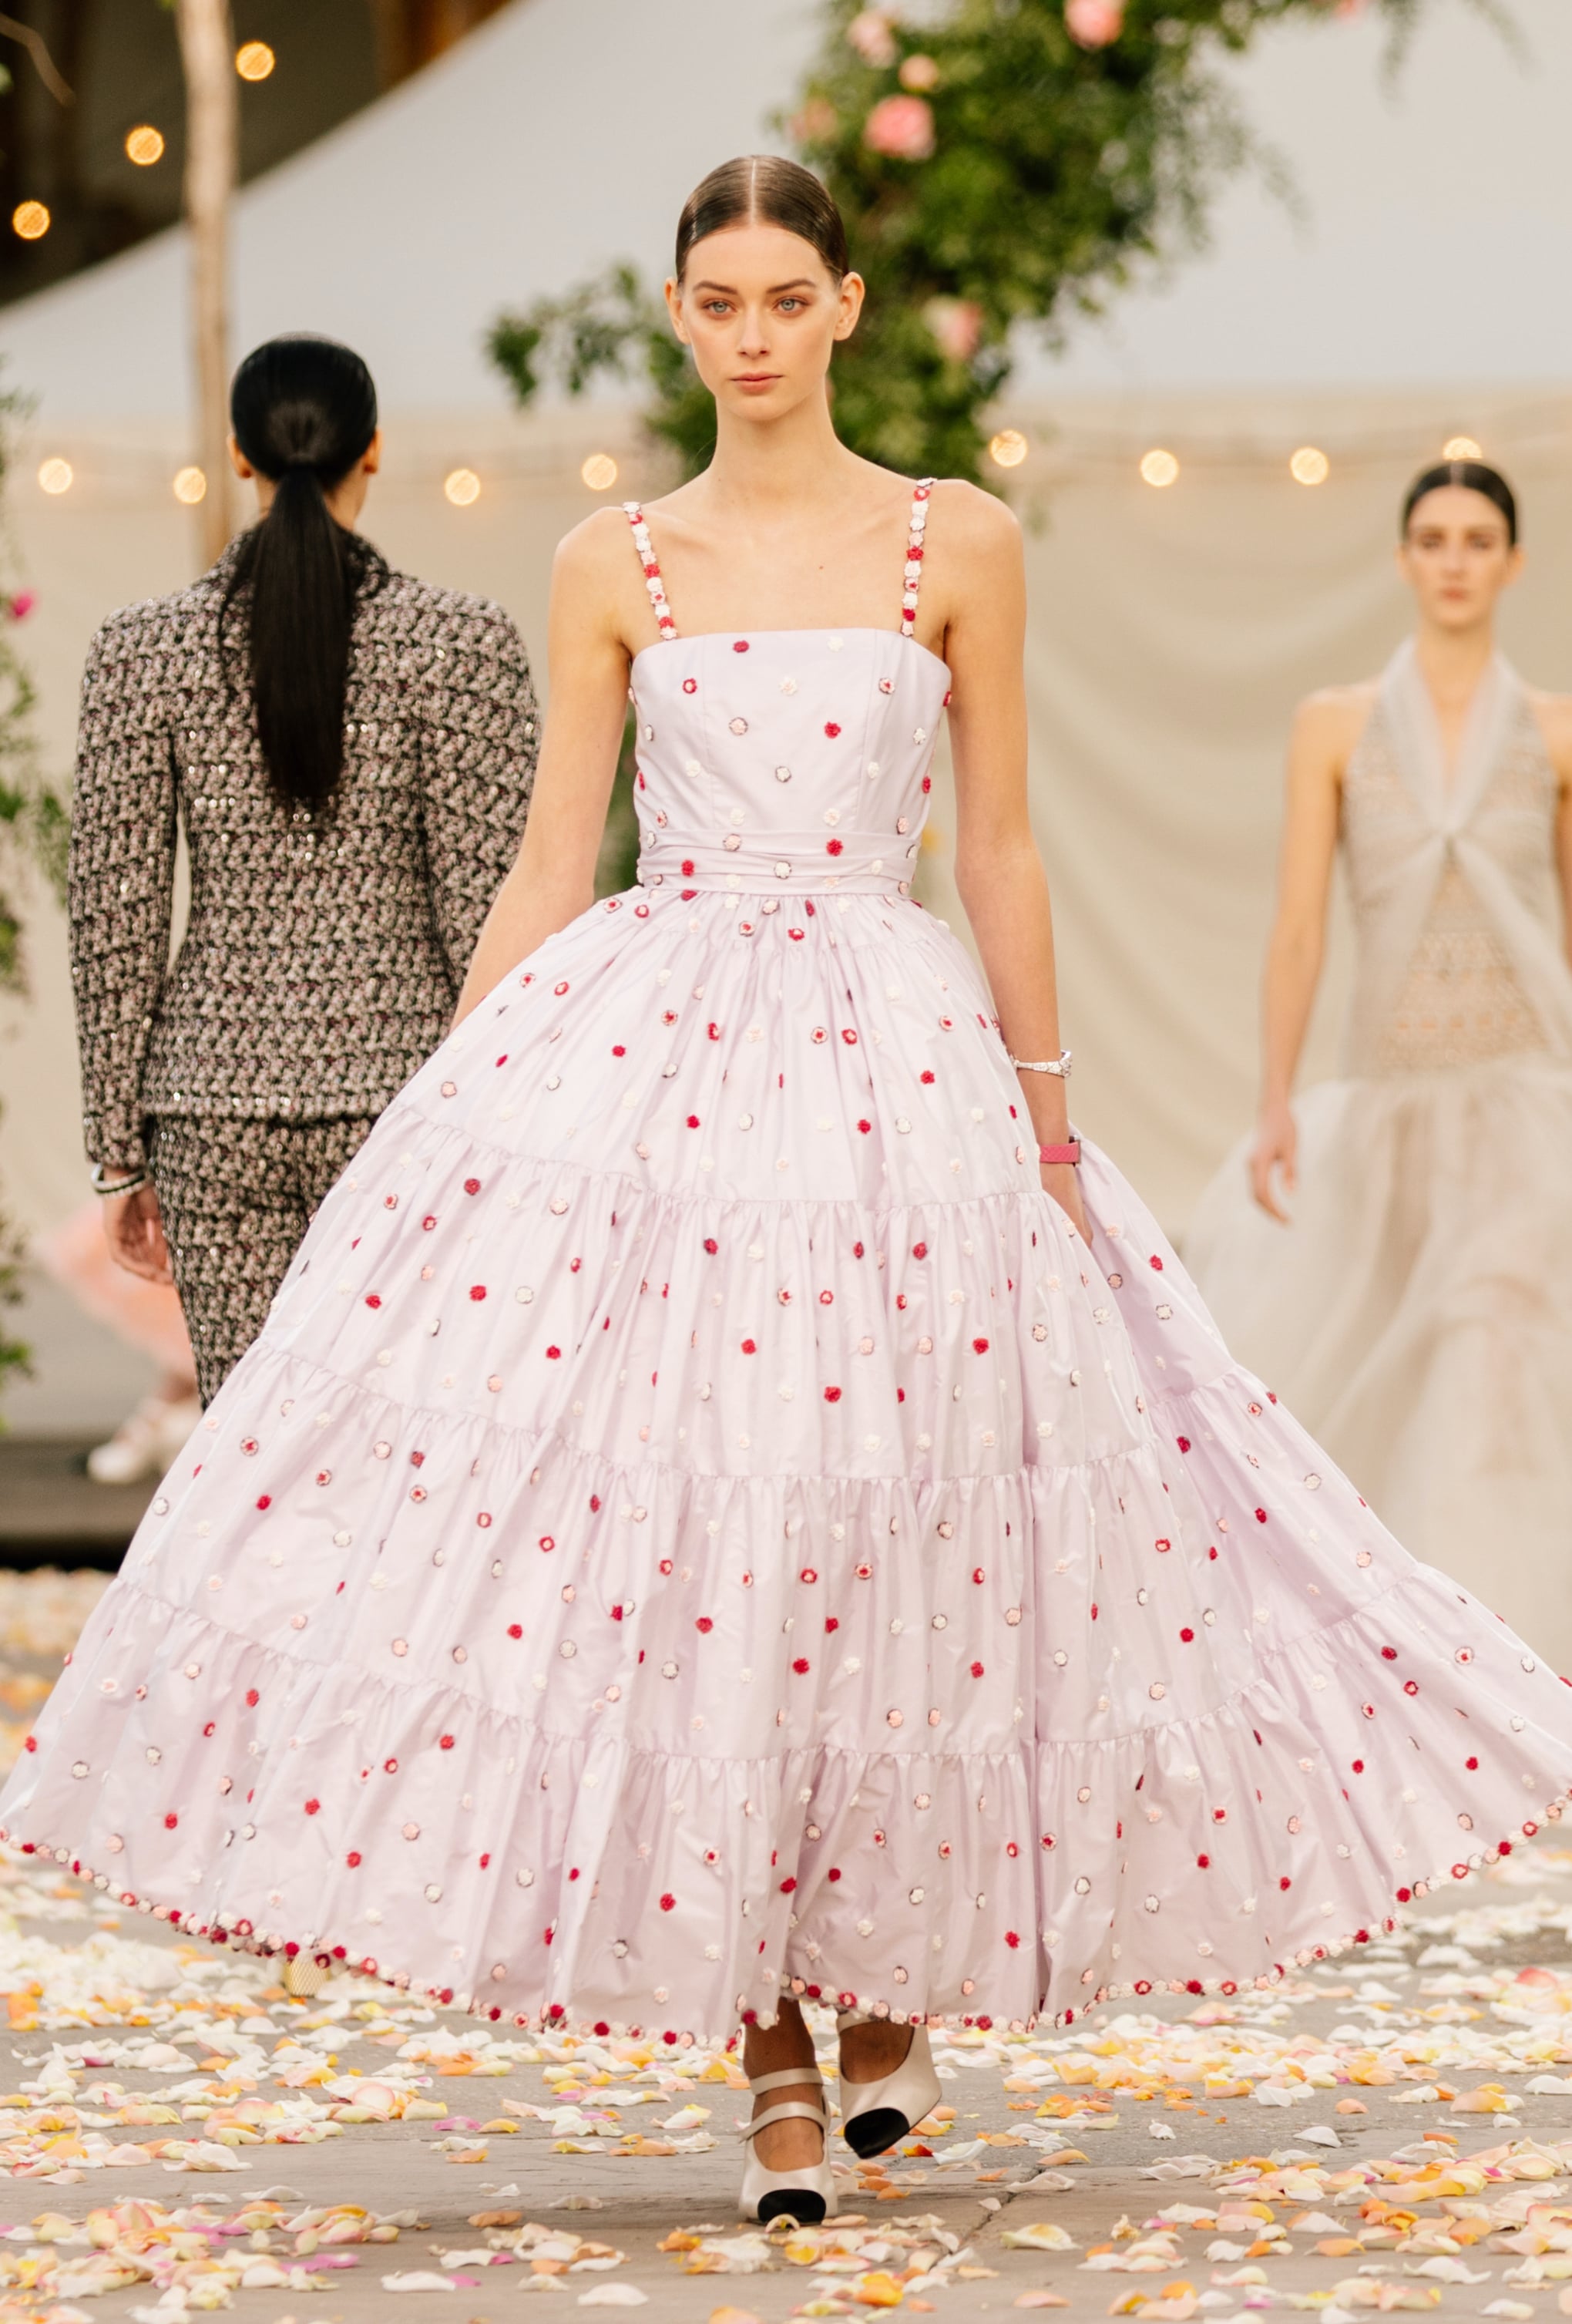 Chanel Haute Couture Spring Summer 2021 - RUNWAY MAGAZINE